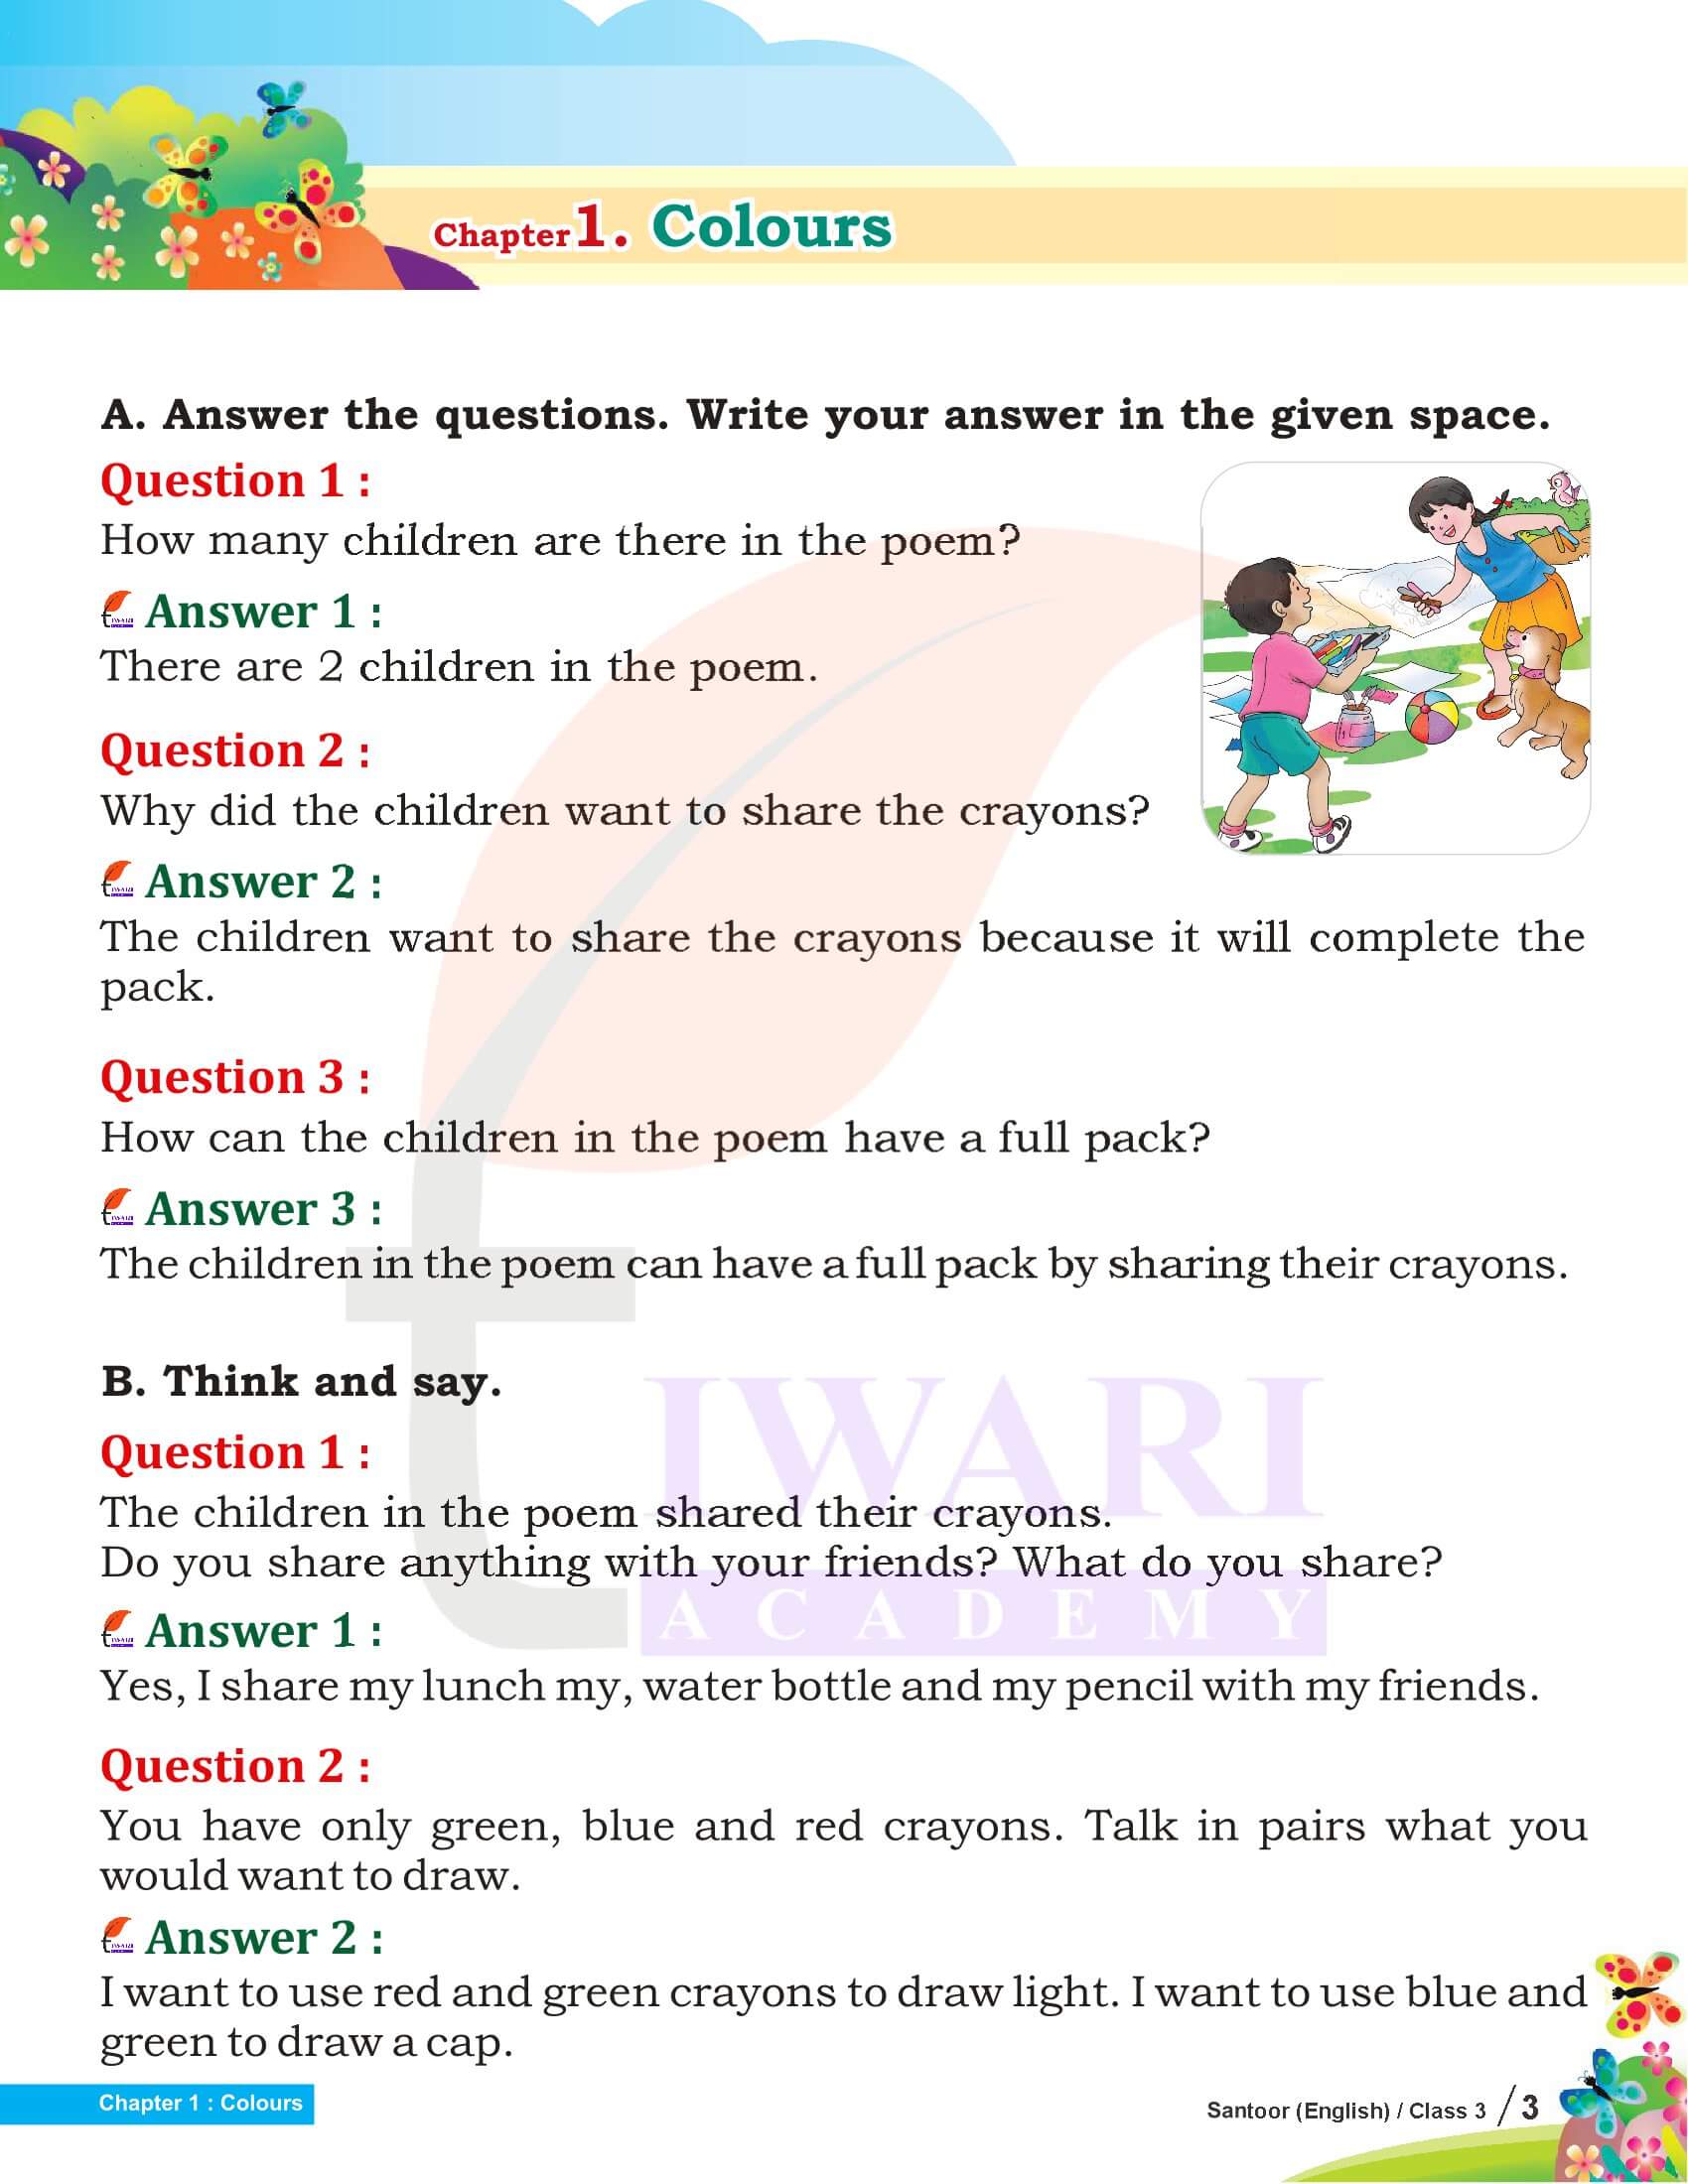 NCERT Solutions Class 3 English Santoor Chapter 1 Colours